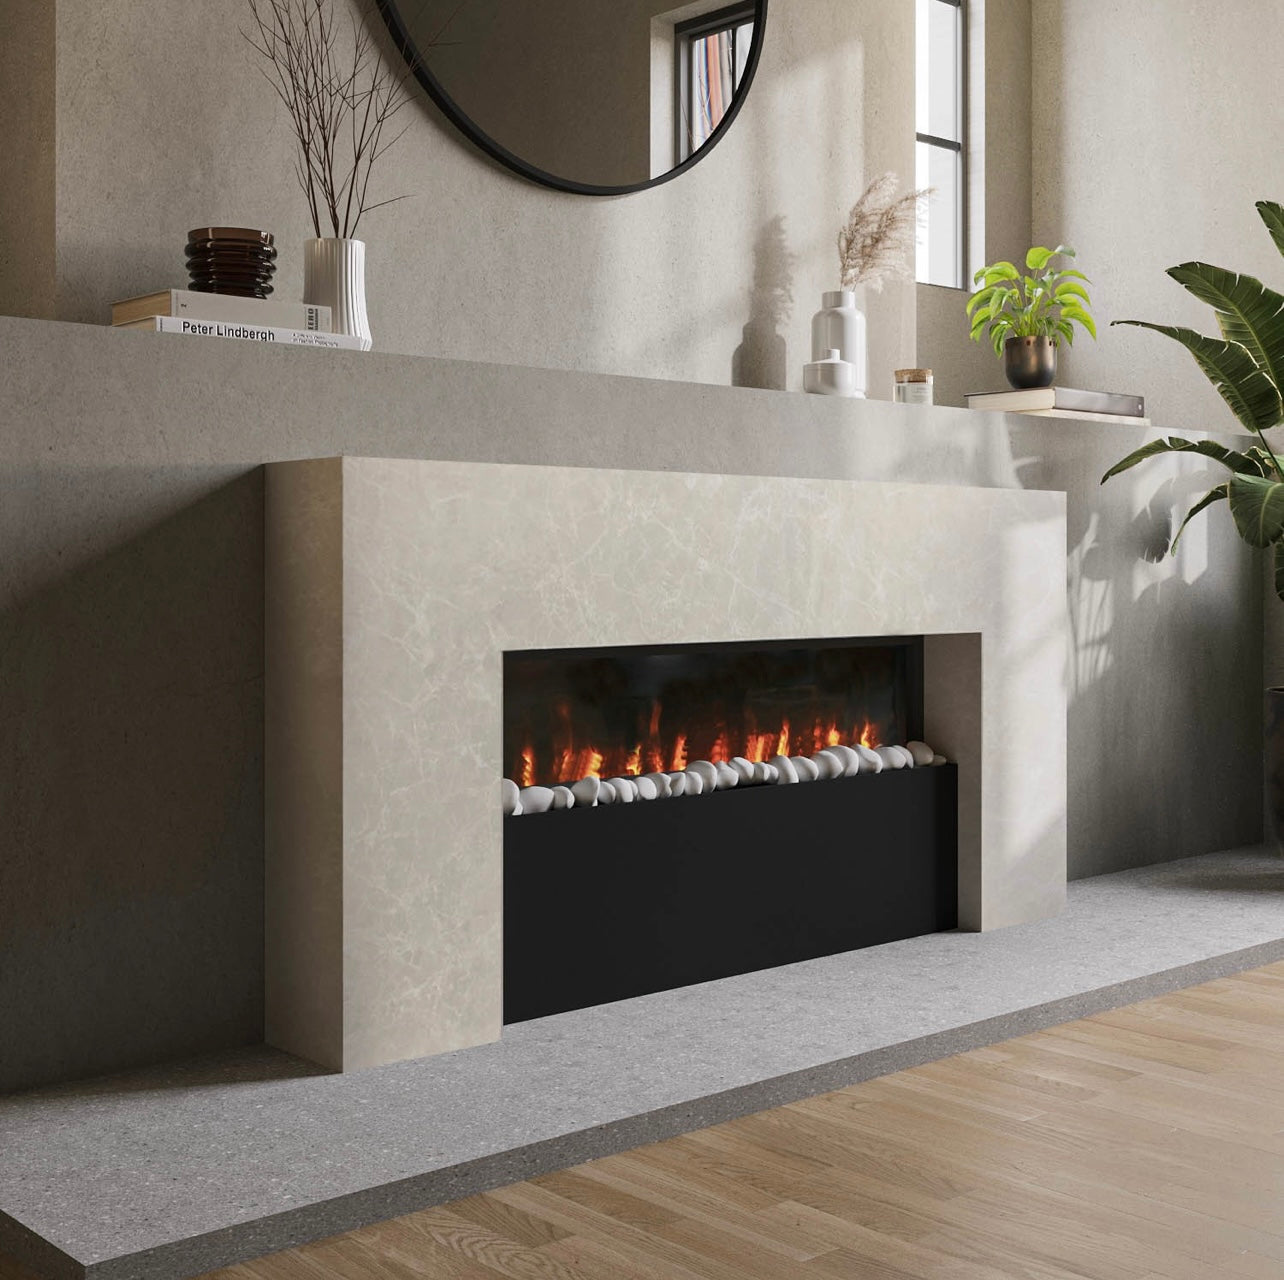 Electric Fireplace with LED Flames and Remote Control